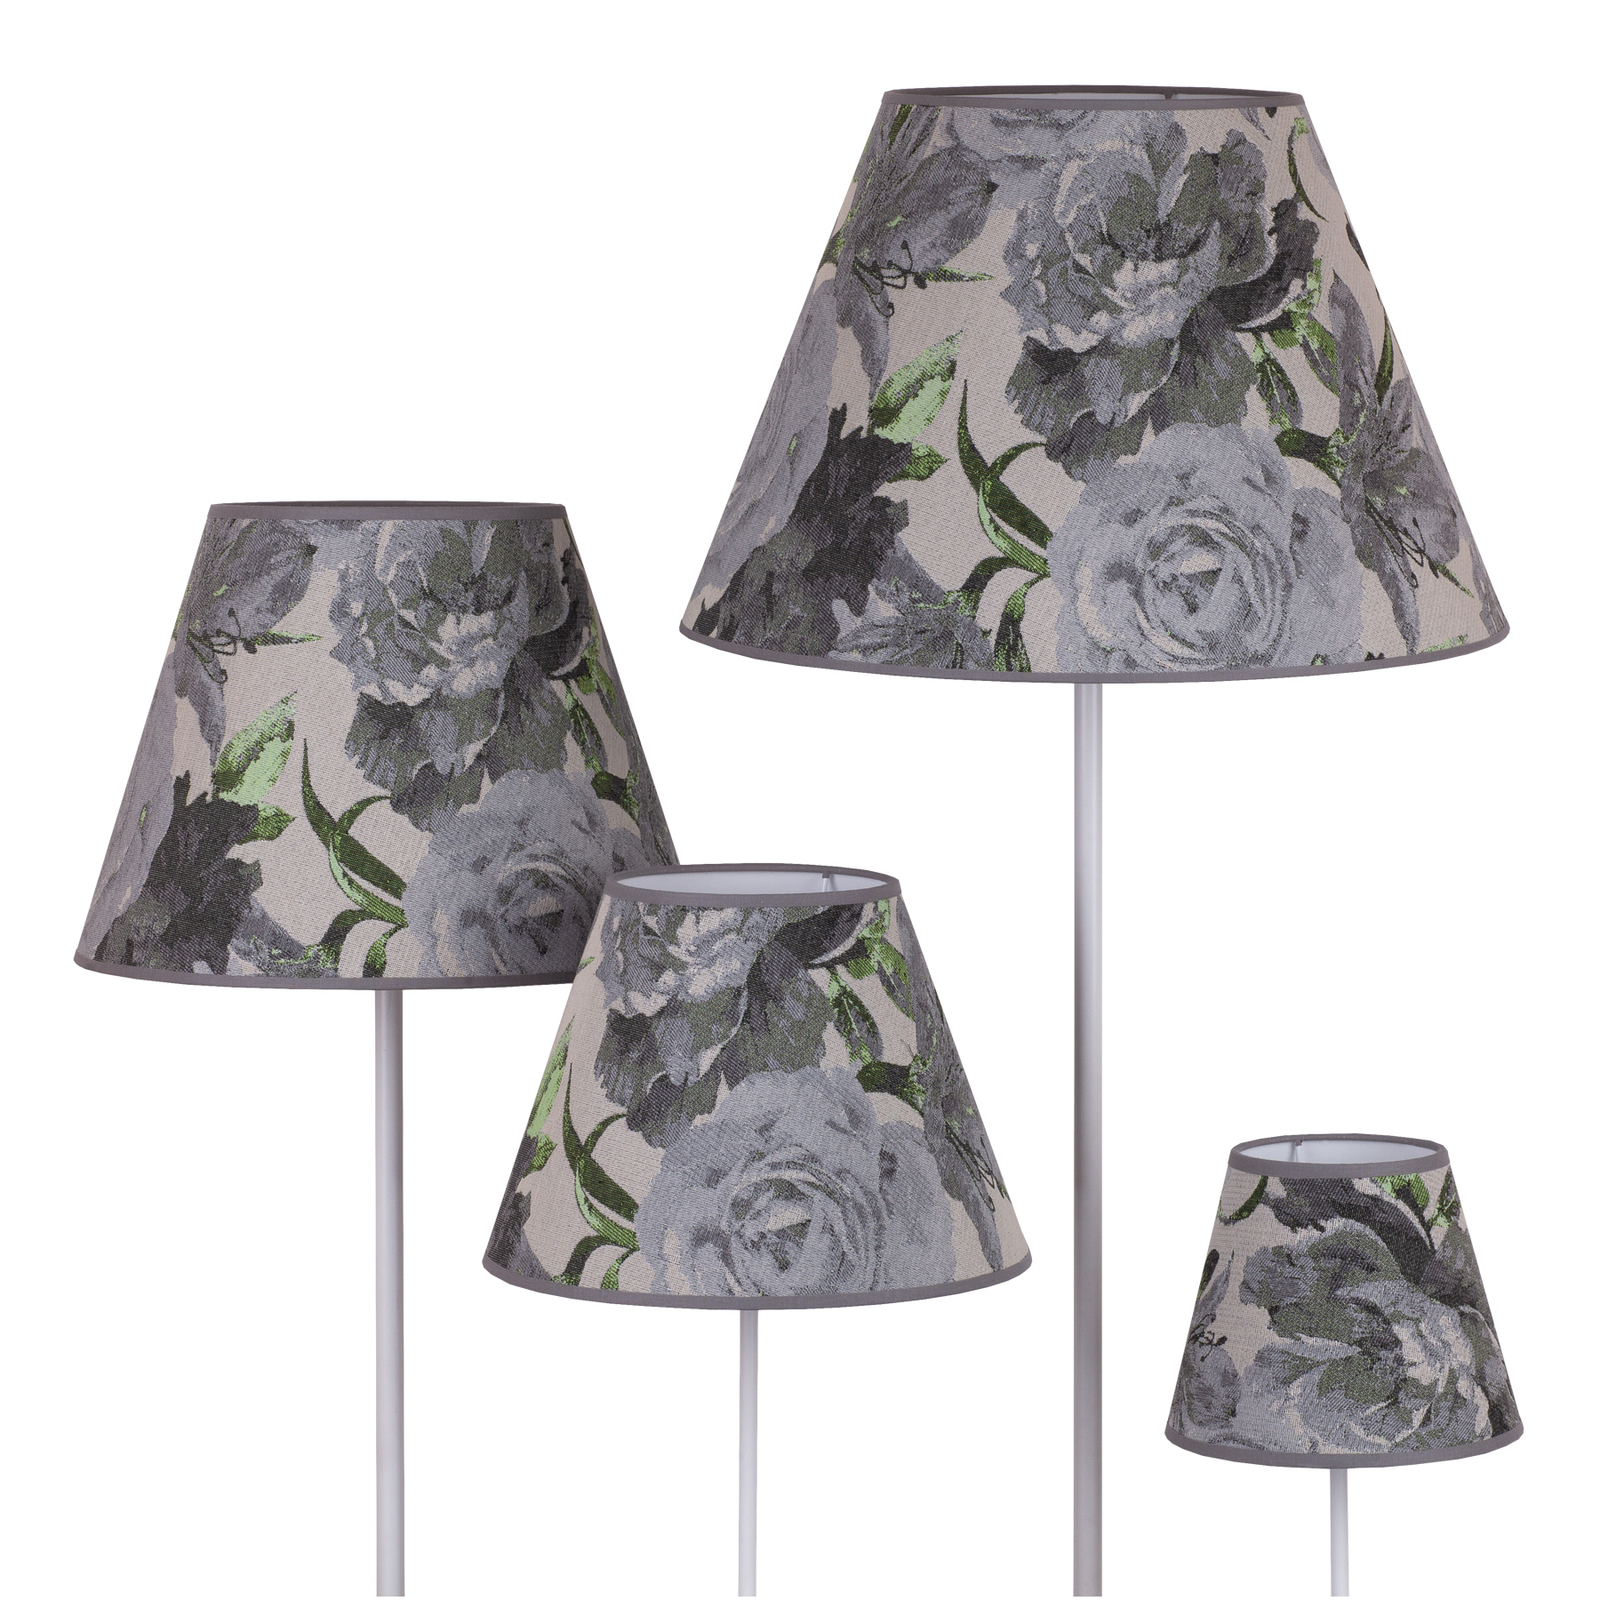 Sofia lampshade height 15.5 cm floral pattern grey